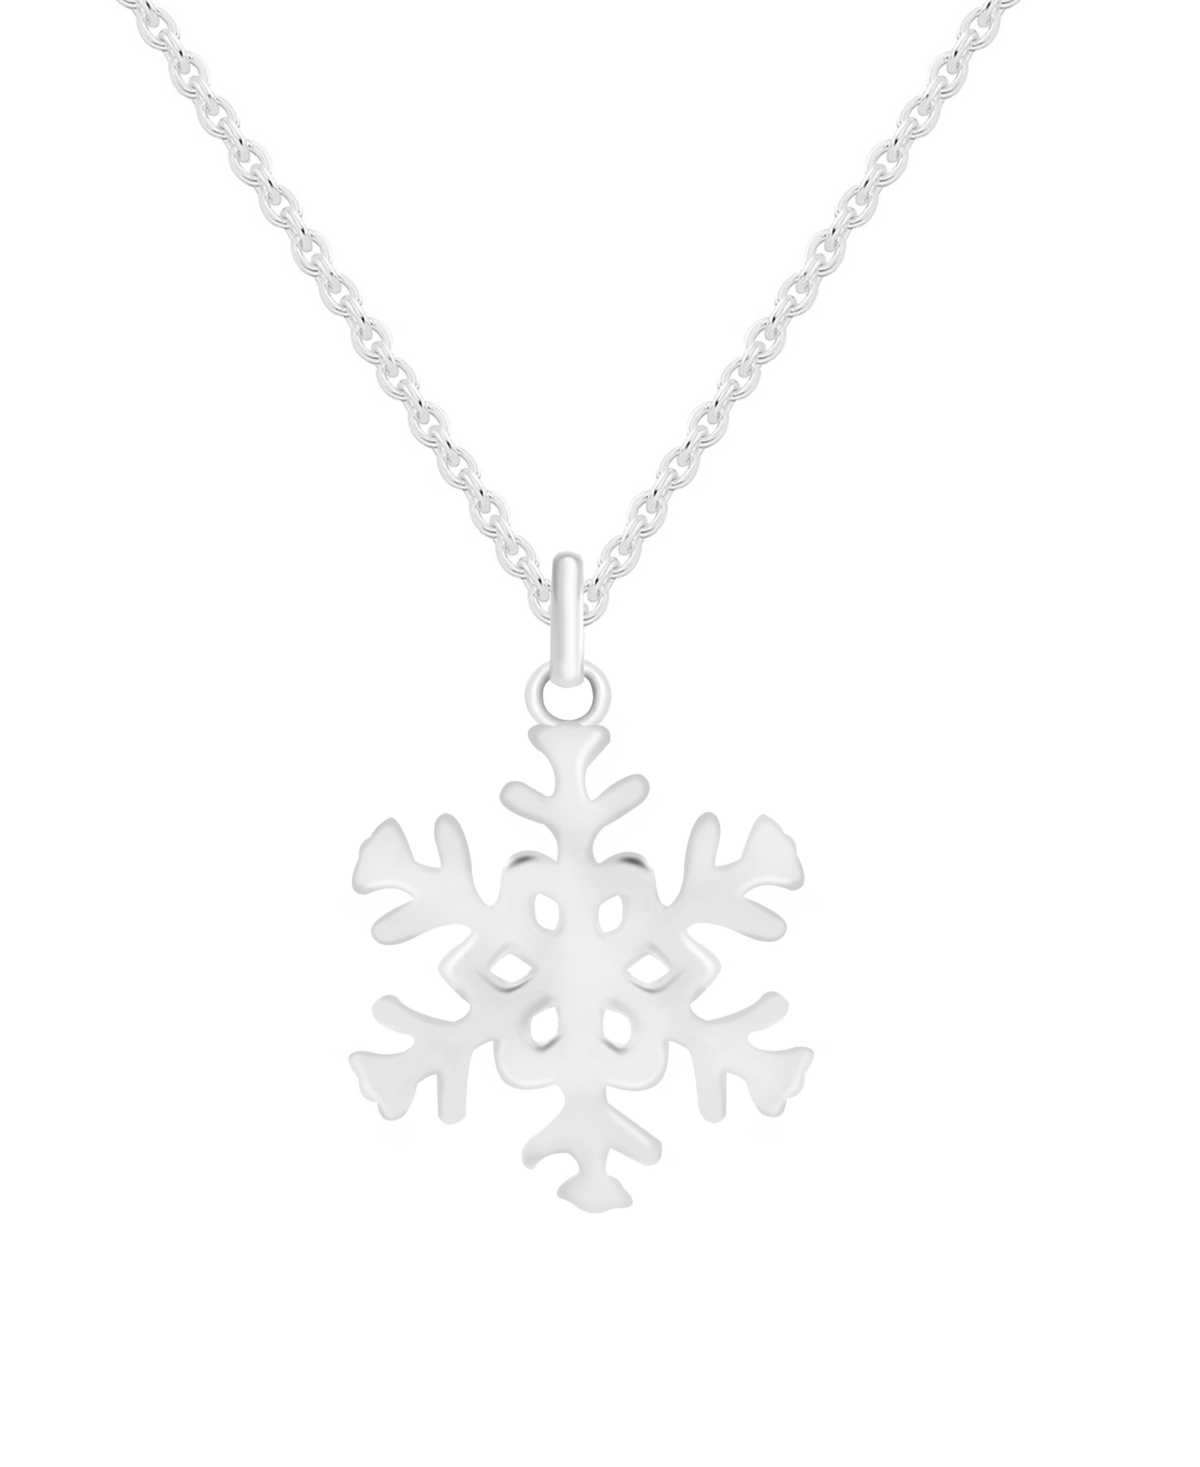 Snowflake Drop Necklace in Fine Silver Plate in Gift Card Box - Silver-Tone